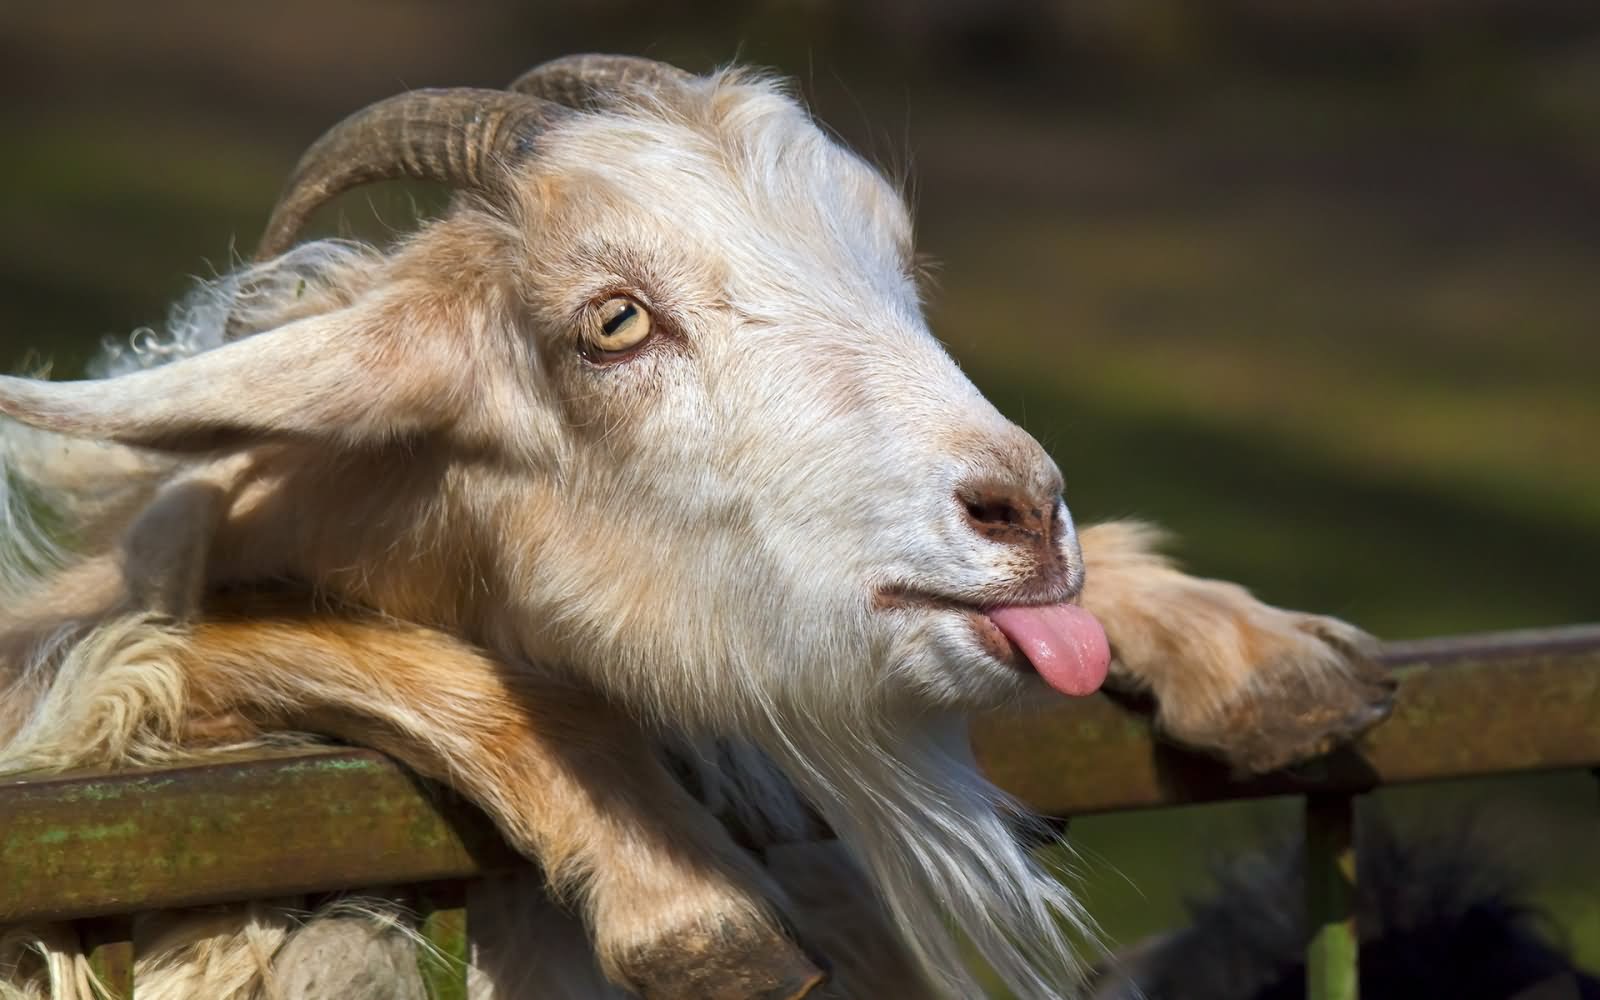 Baby Goat Funny Face Image